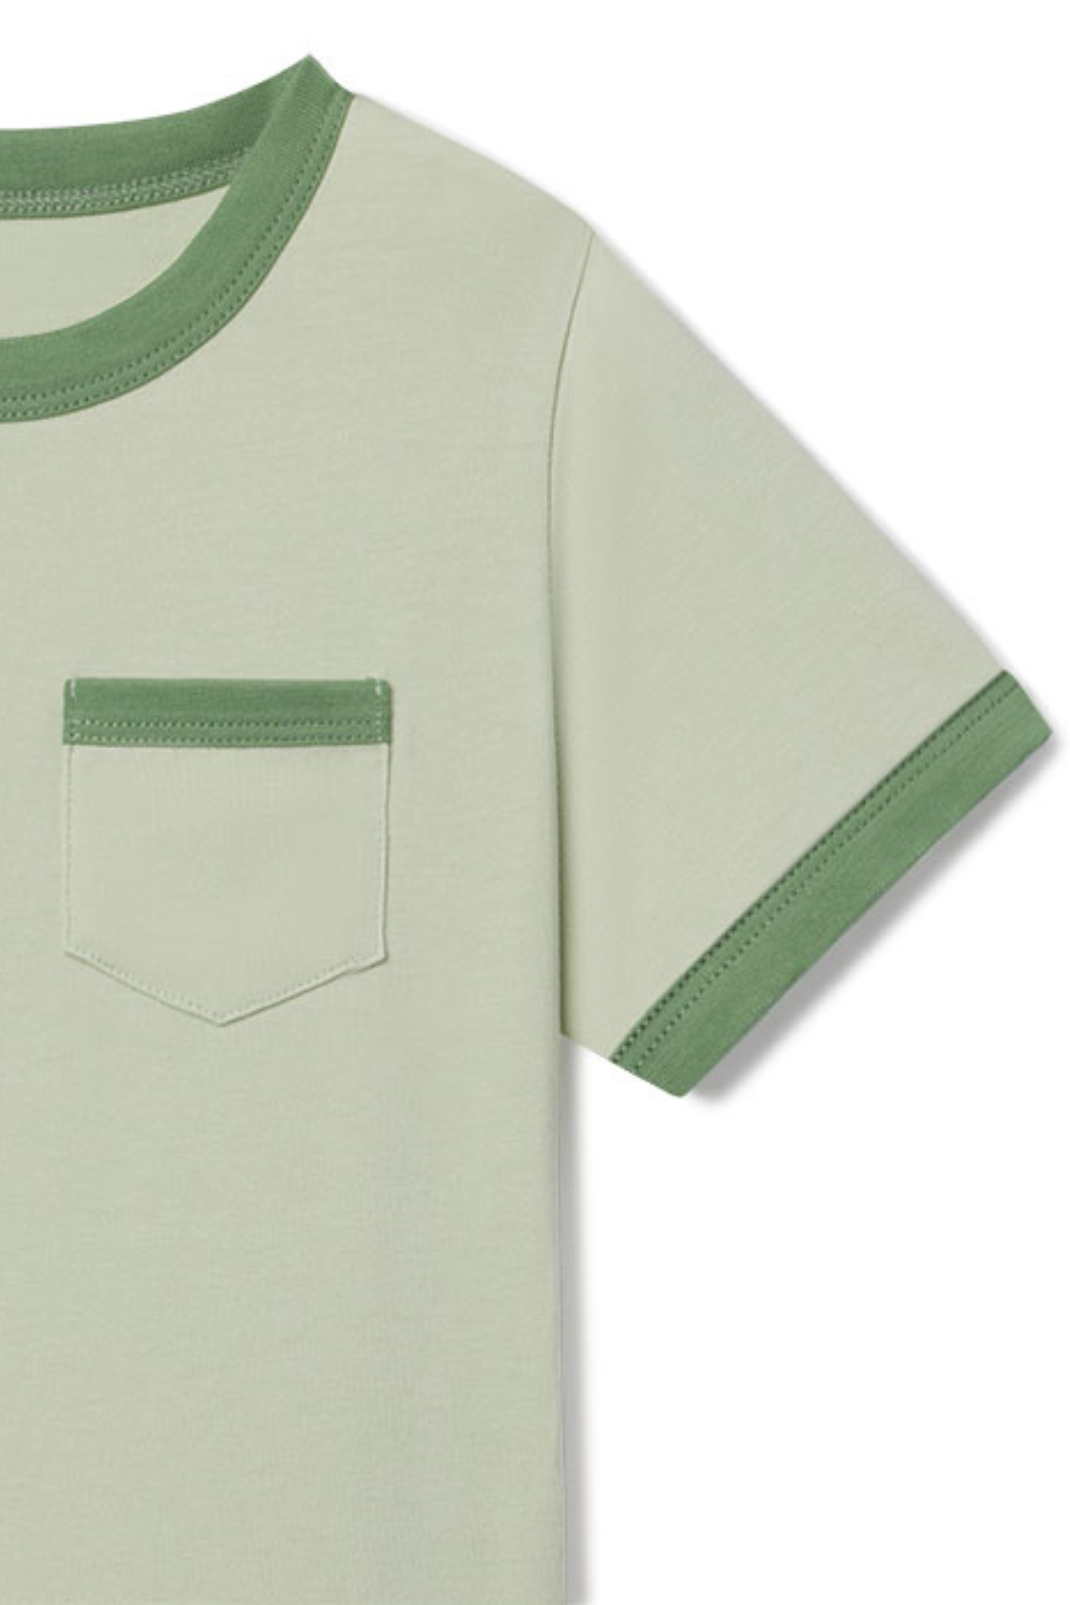 Jacob Ringer Tee in Seafoam with Mint